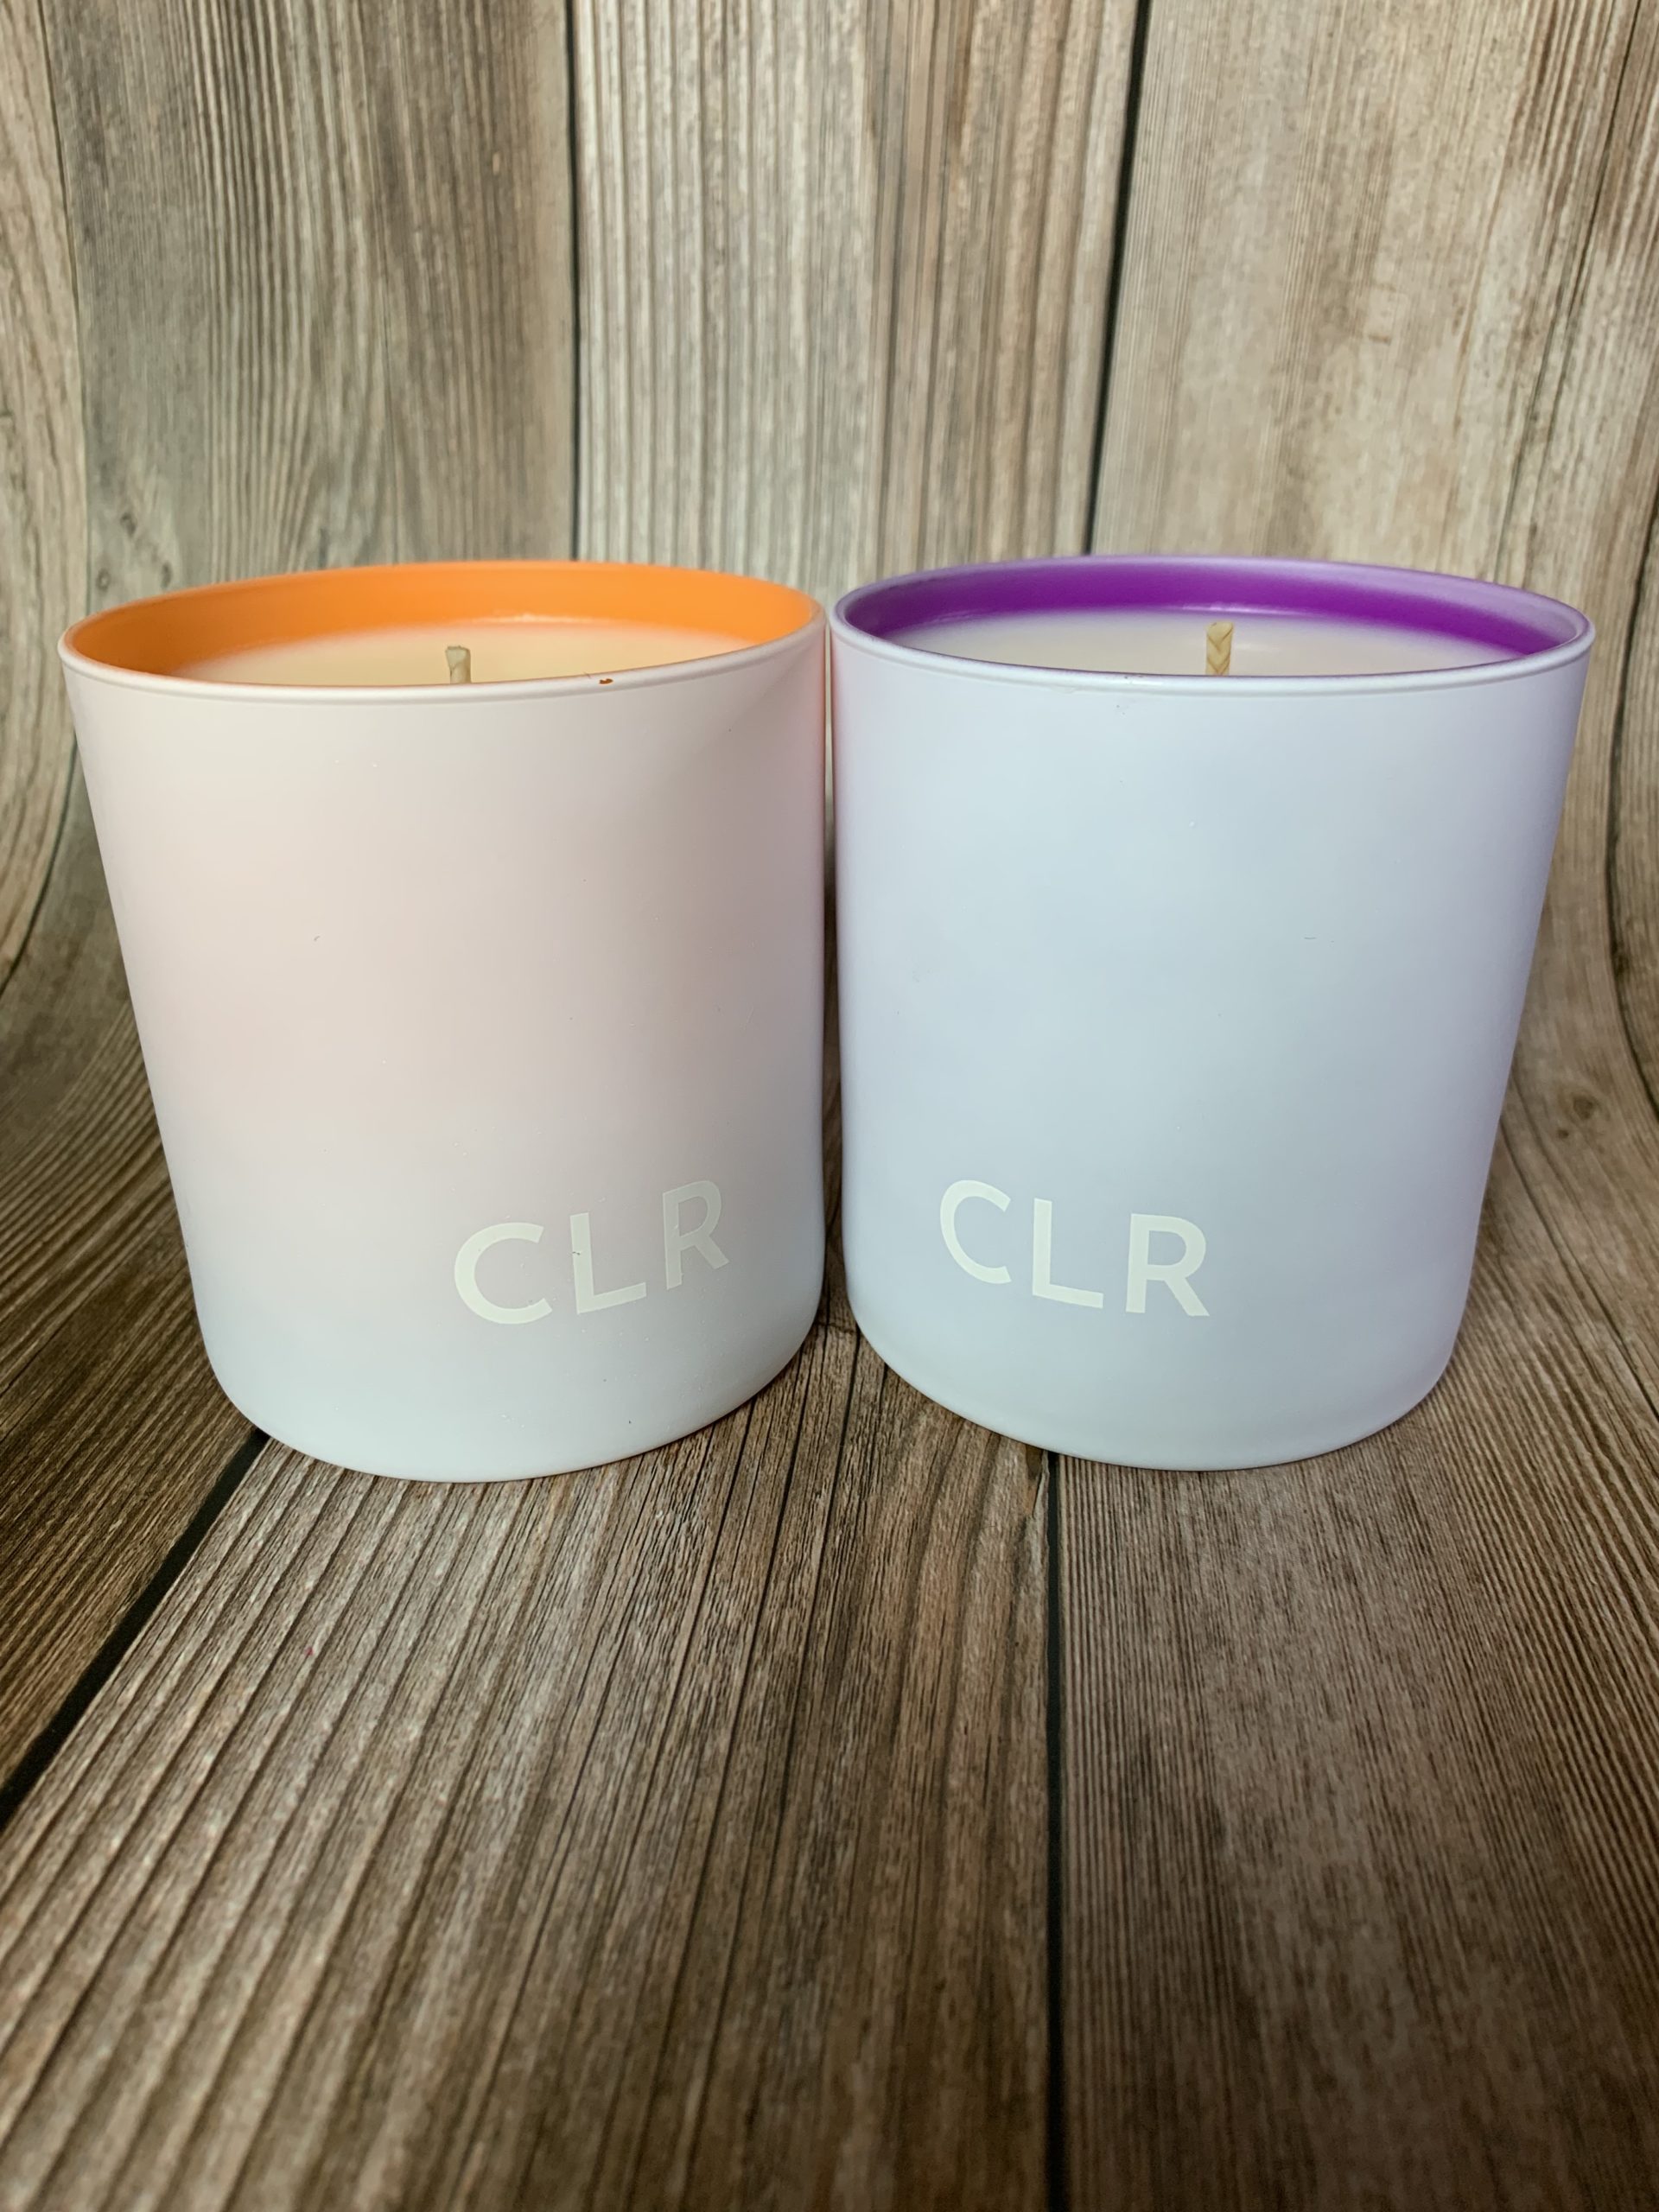 With candles for every person, mood, and color, CLR’s classic collection features six types of candles that reflect a spectrum of moods.